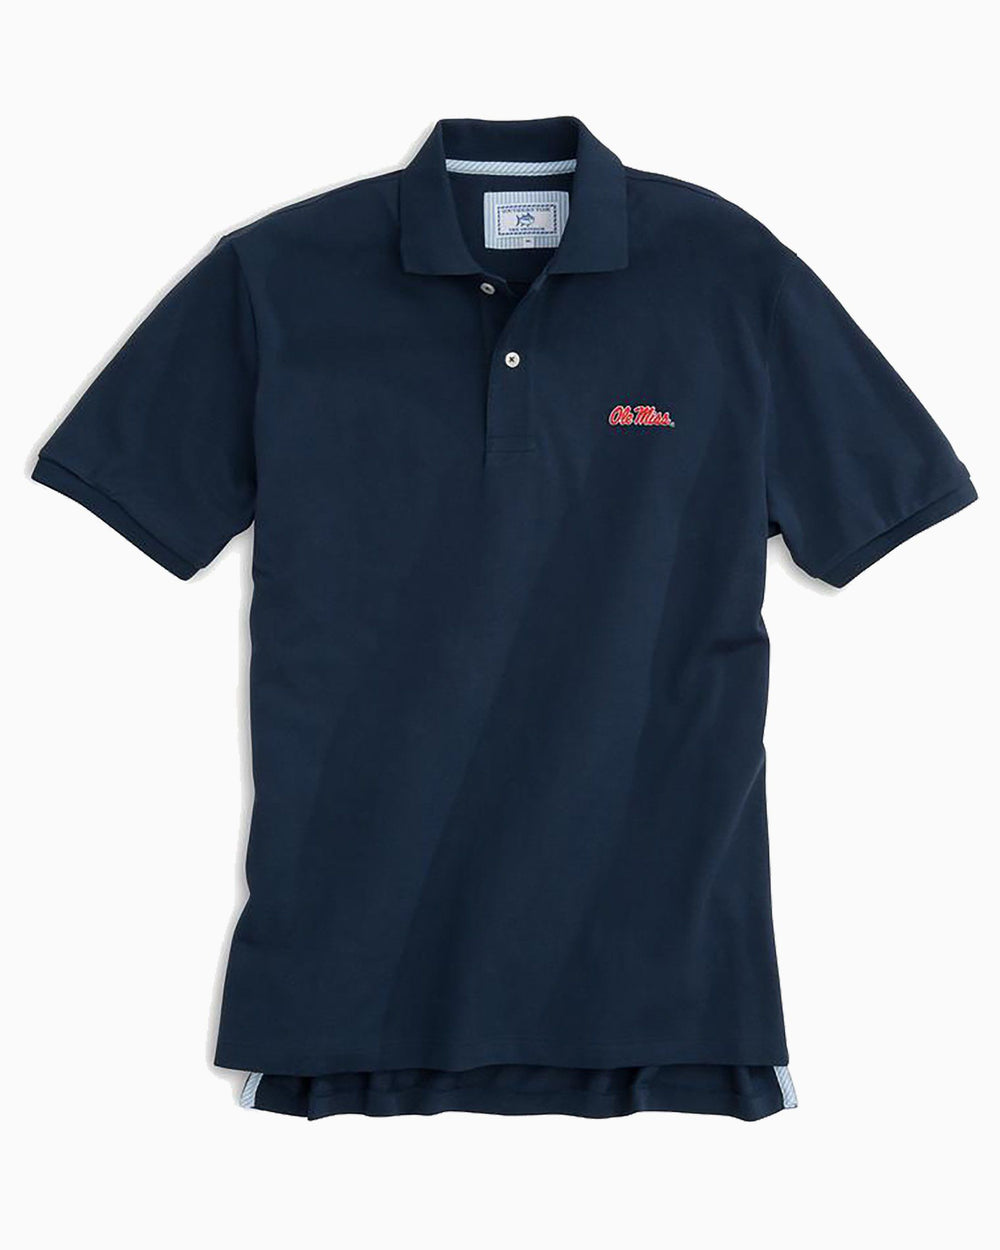 The front view of the Men's Navy Ole Miss Pique Polo Shirt by Southern Tide - Navy